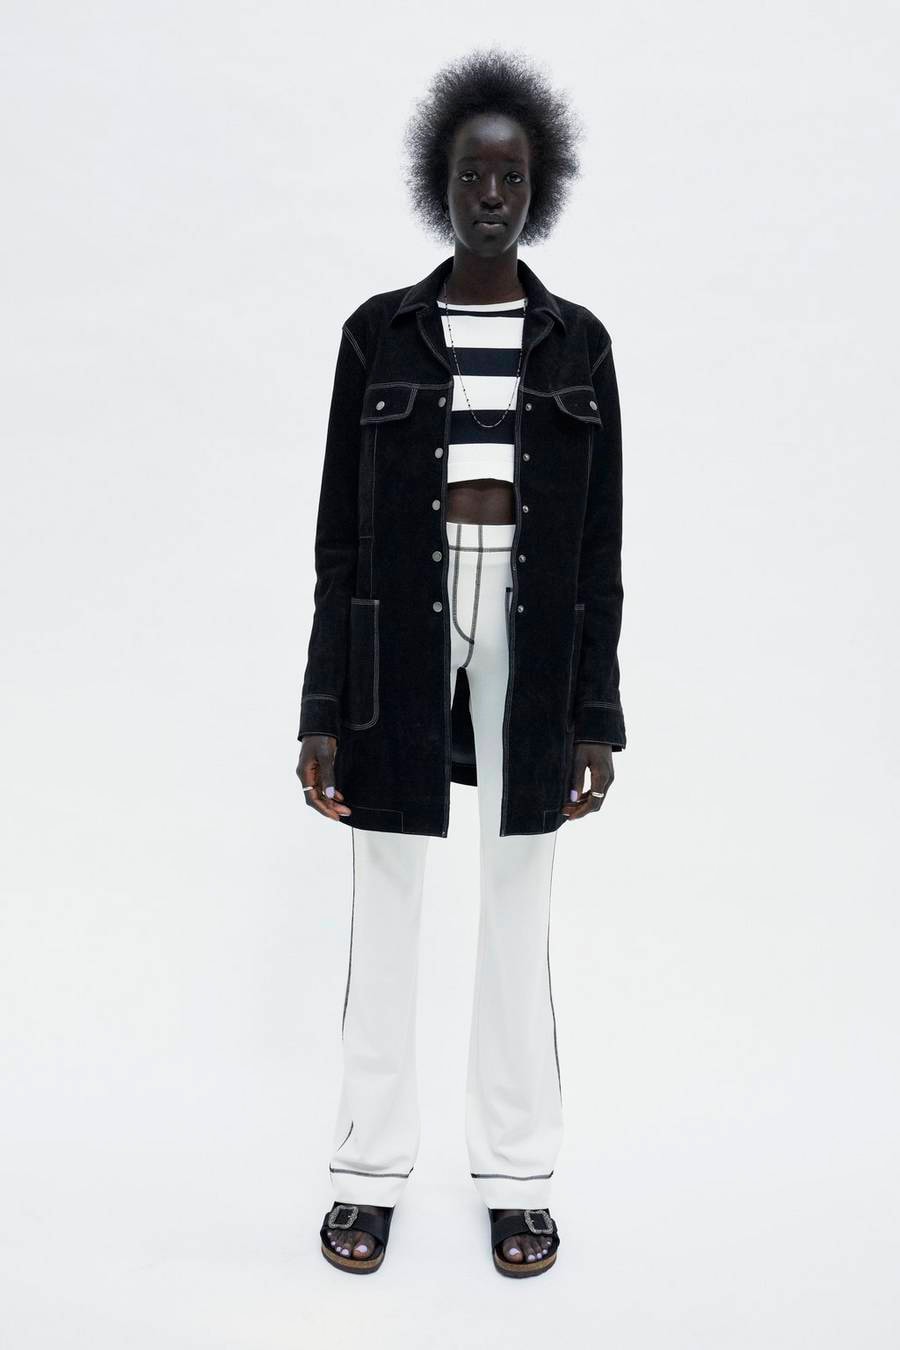 Marc Jacobs Resort 2019 Redux Collection Suede Overcoat Black Wide Striped Long-Sleeve Crop Top Patch Pocket Cotton Jersey Pant White